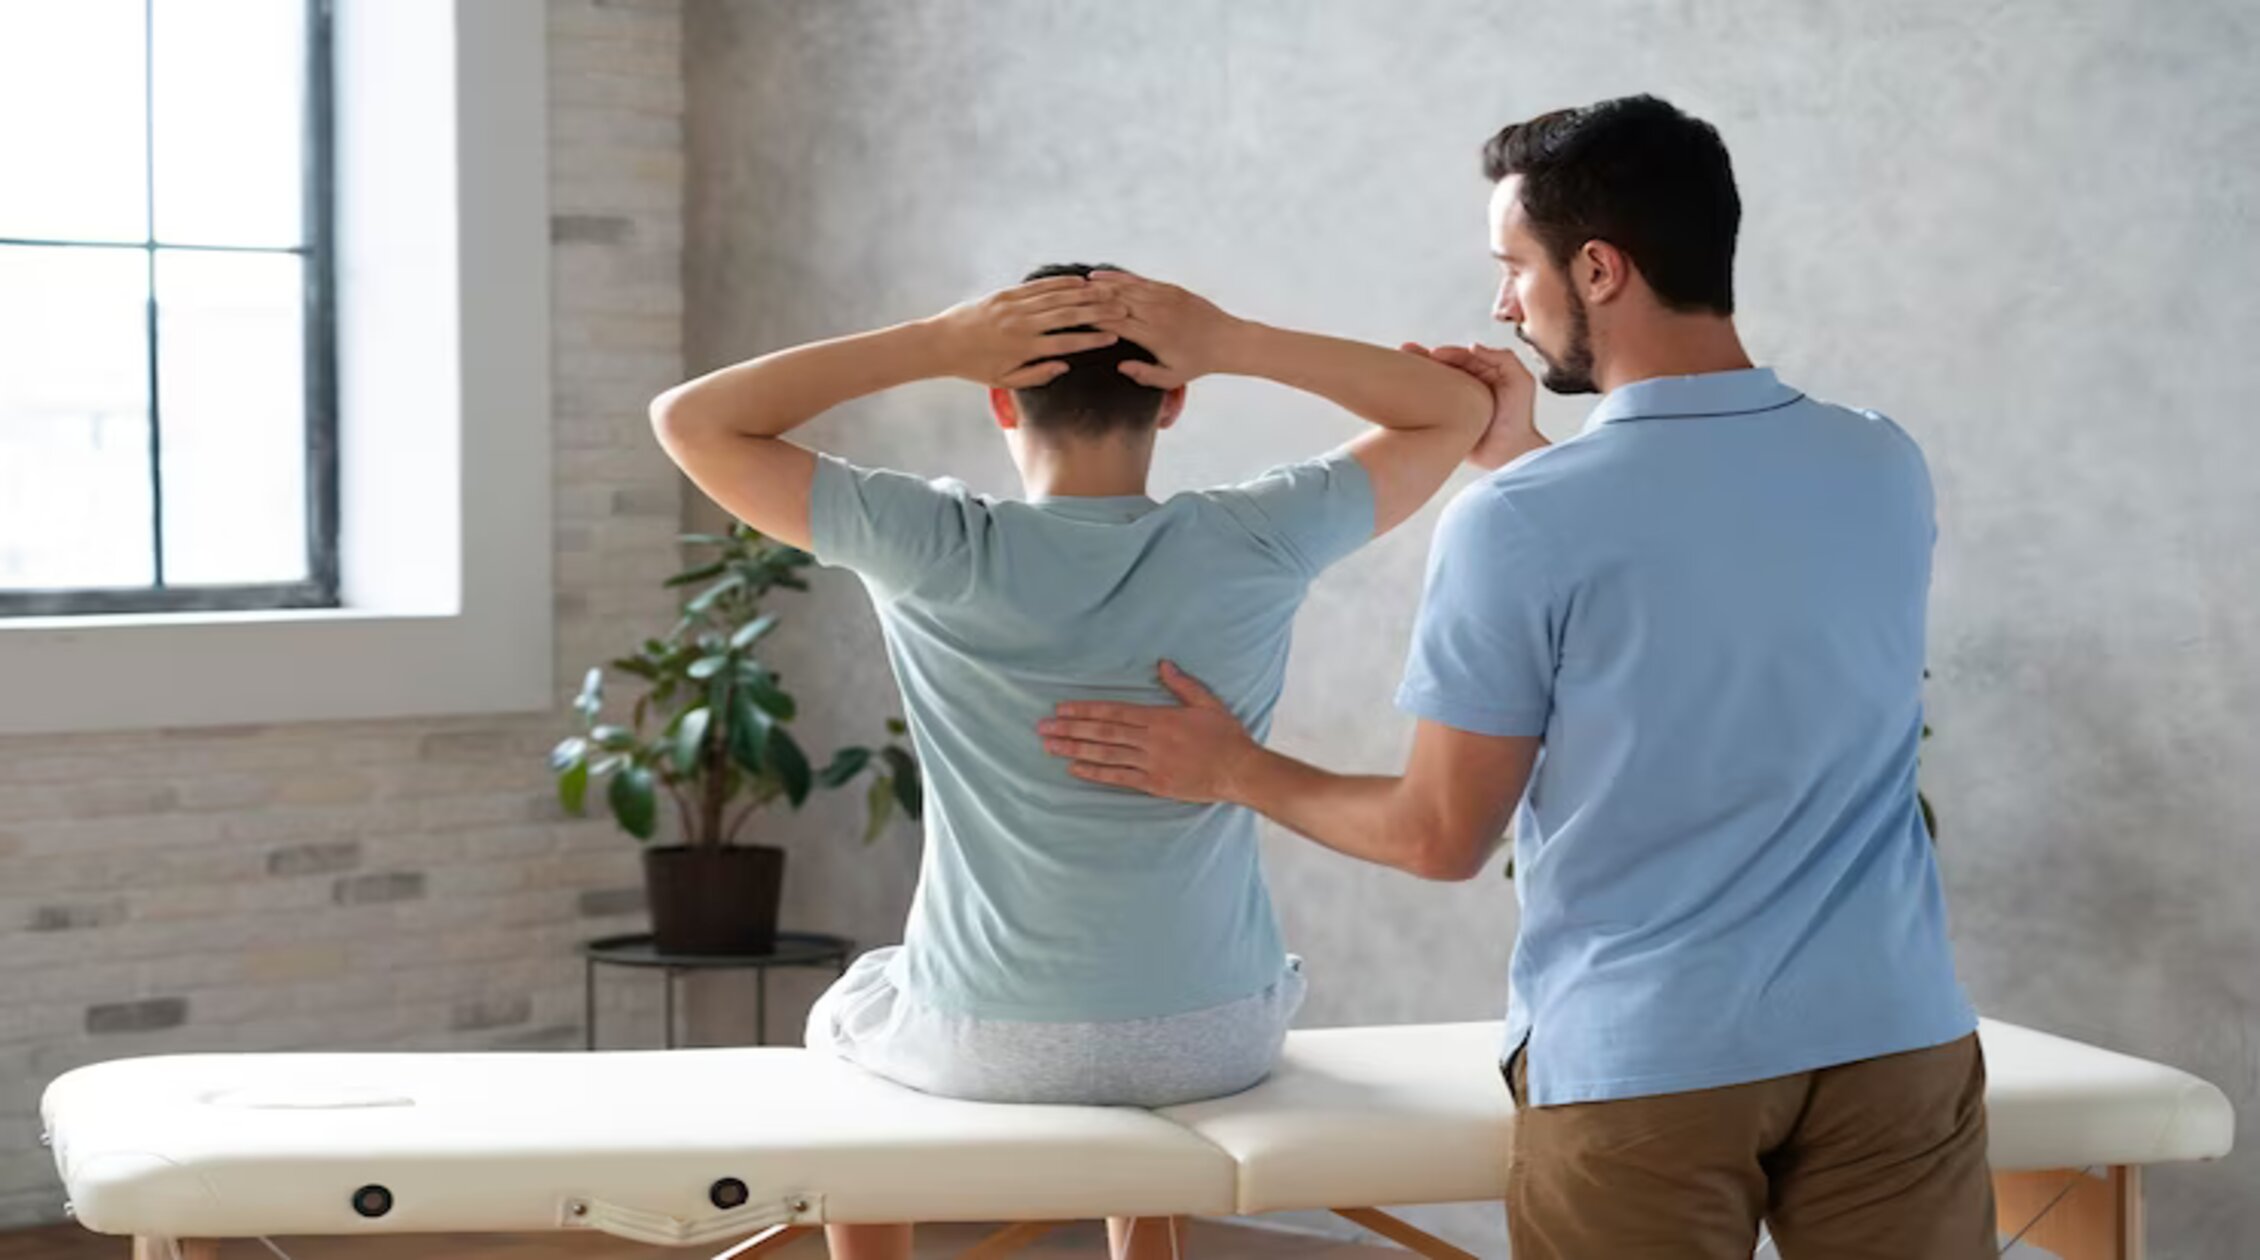 What is a Chiropractor and what do they do?